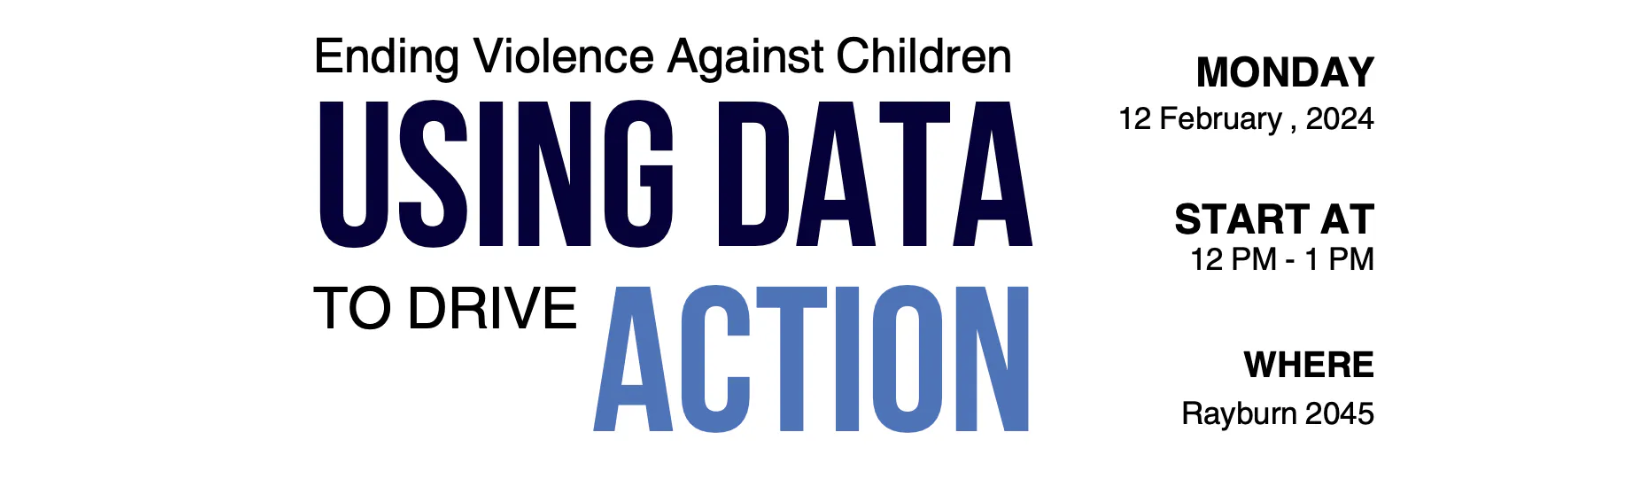 using data to drive action event Feb24